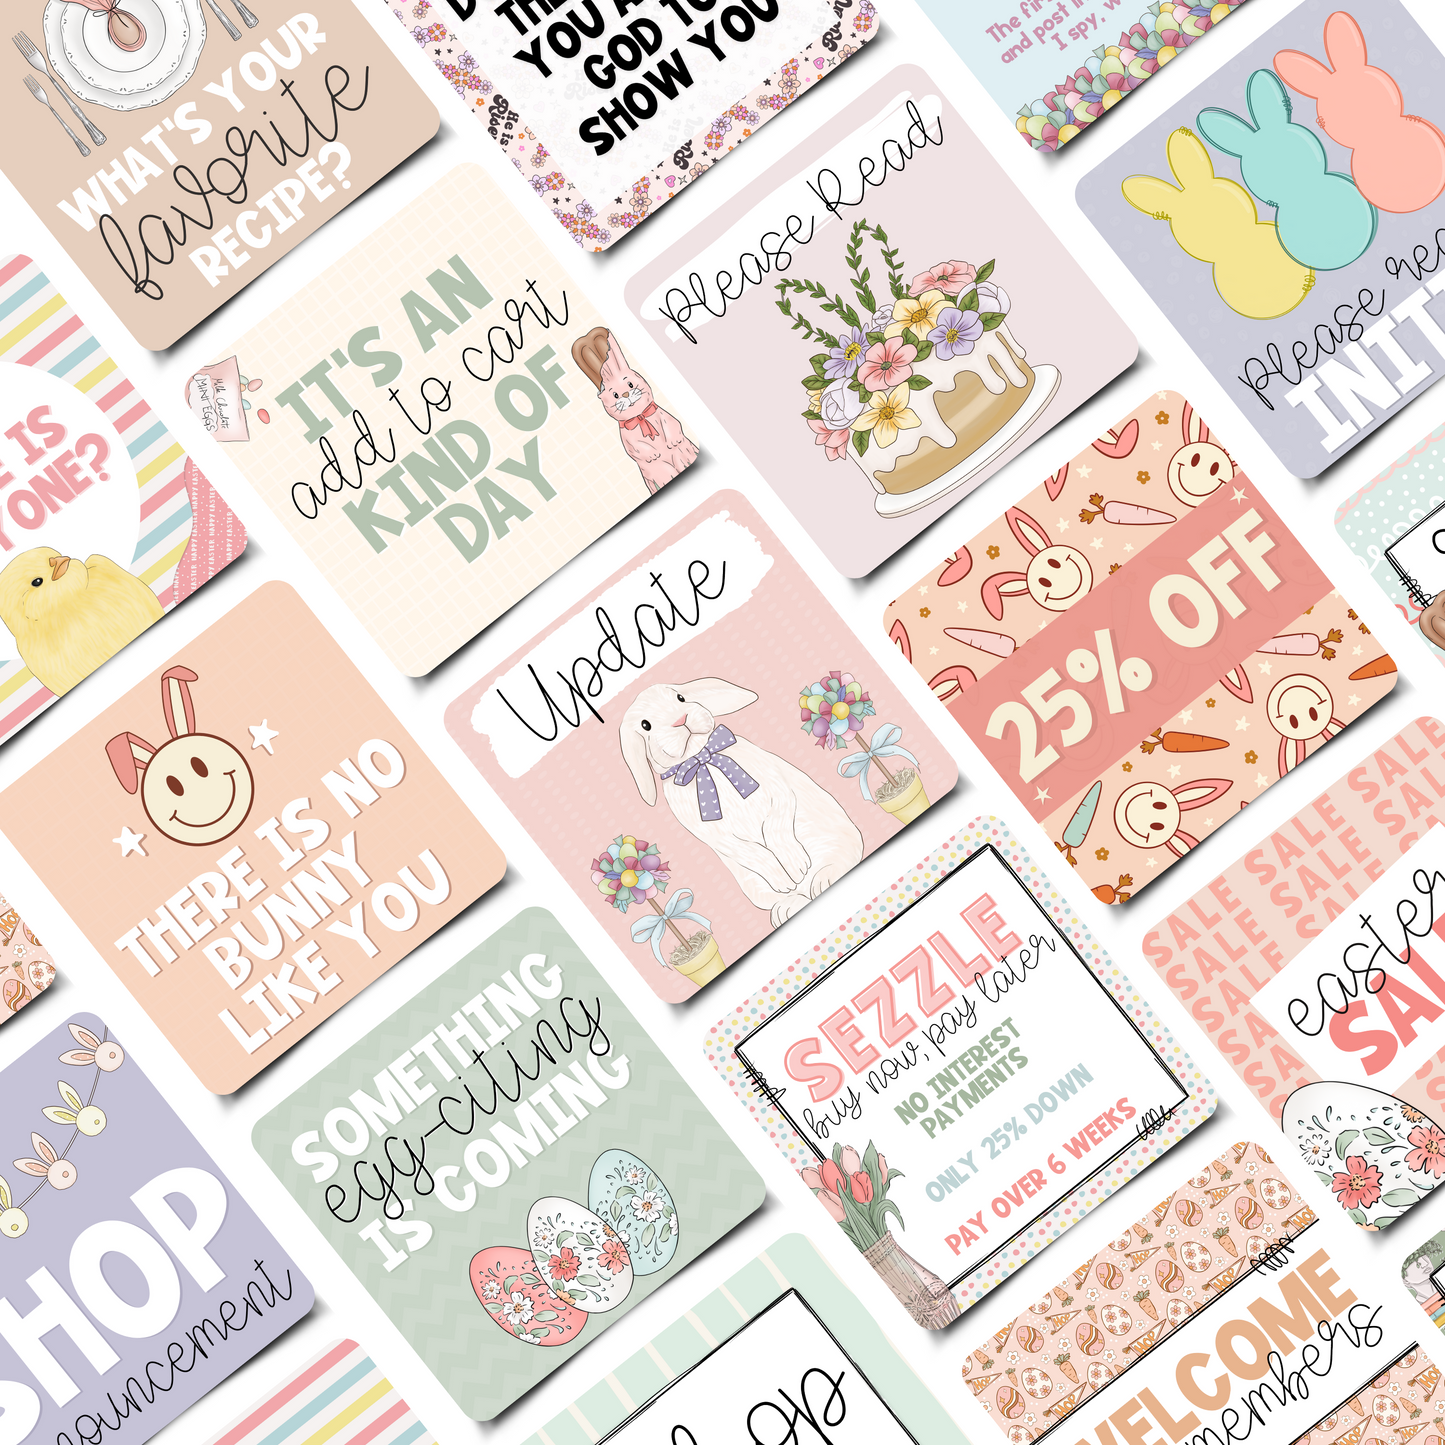 Easter Business Engagement & Social Media Content Graphics Collection